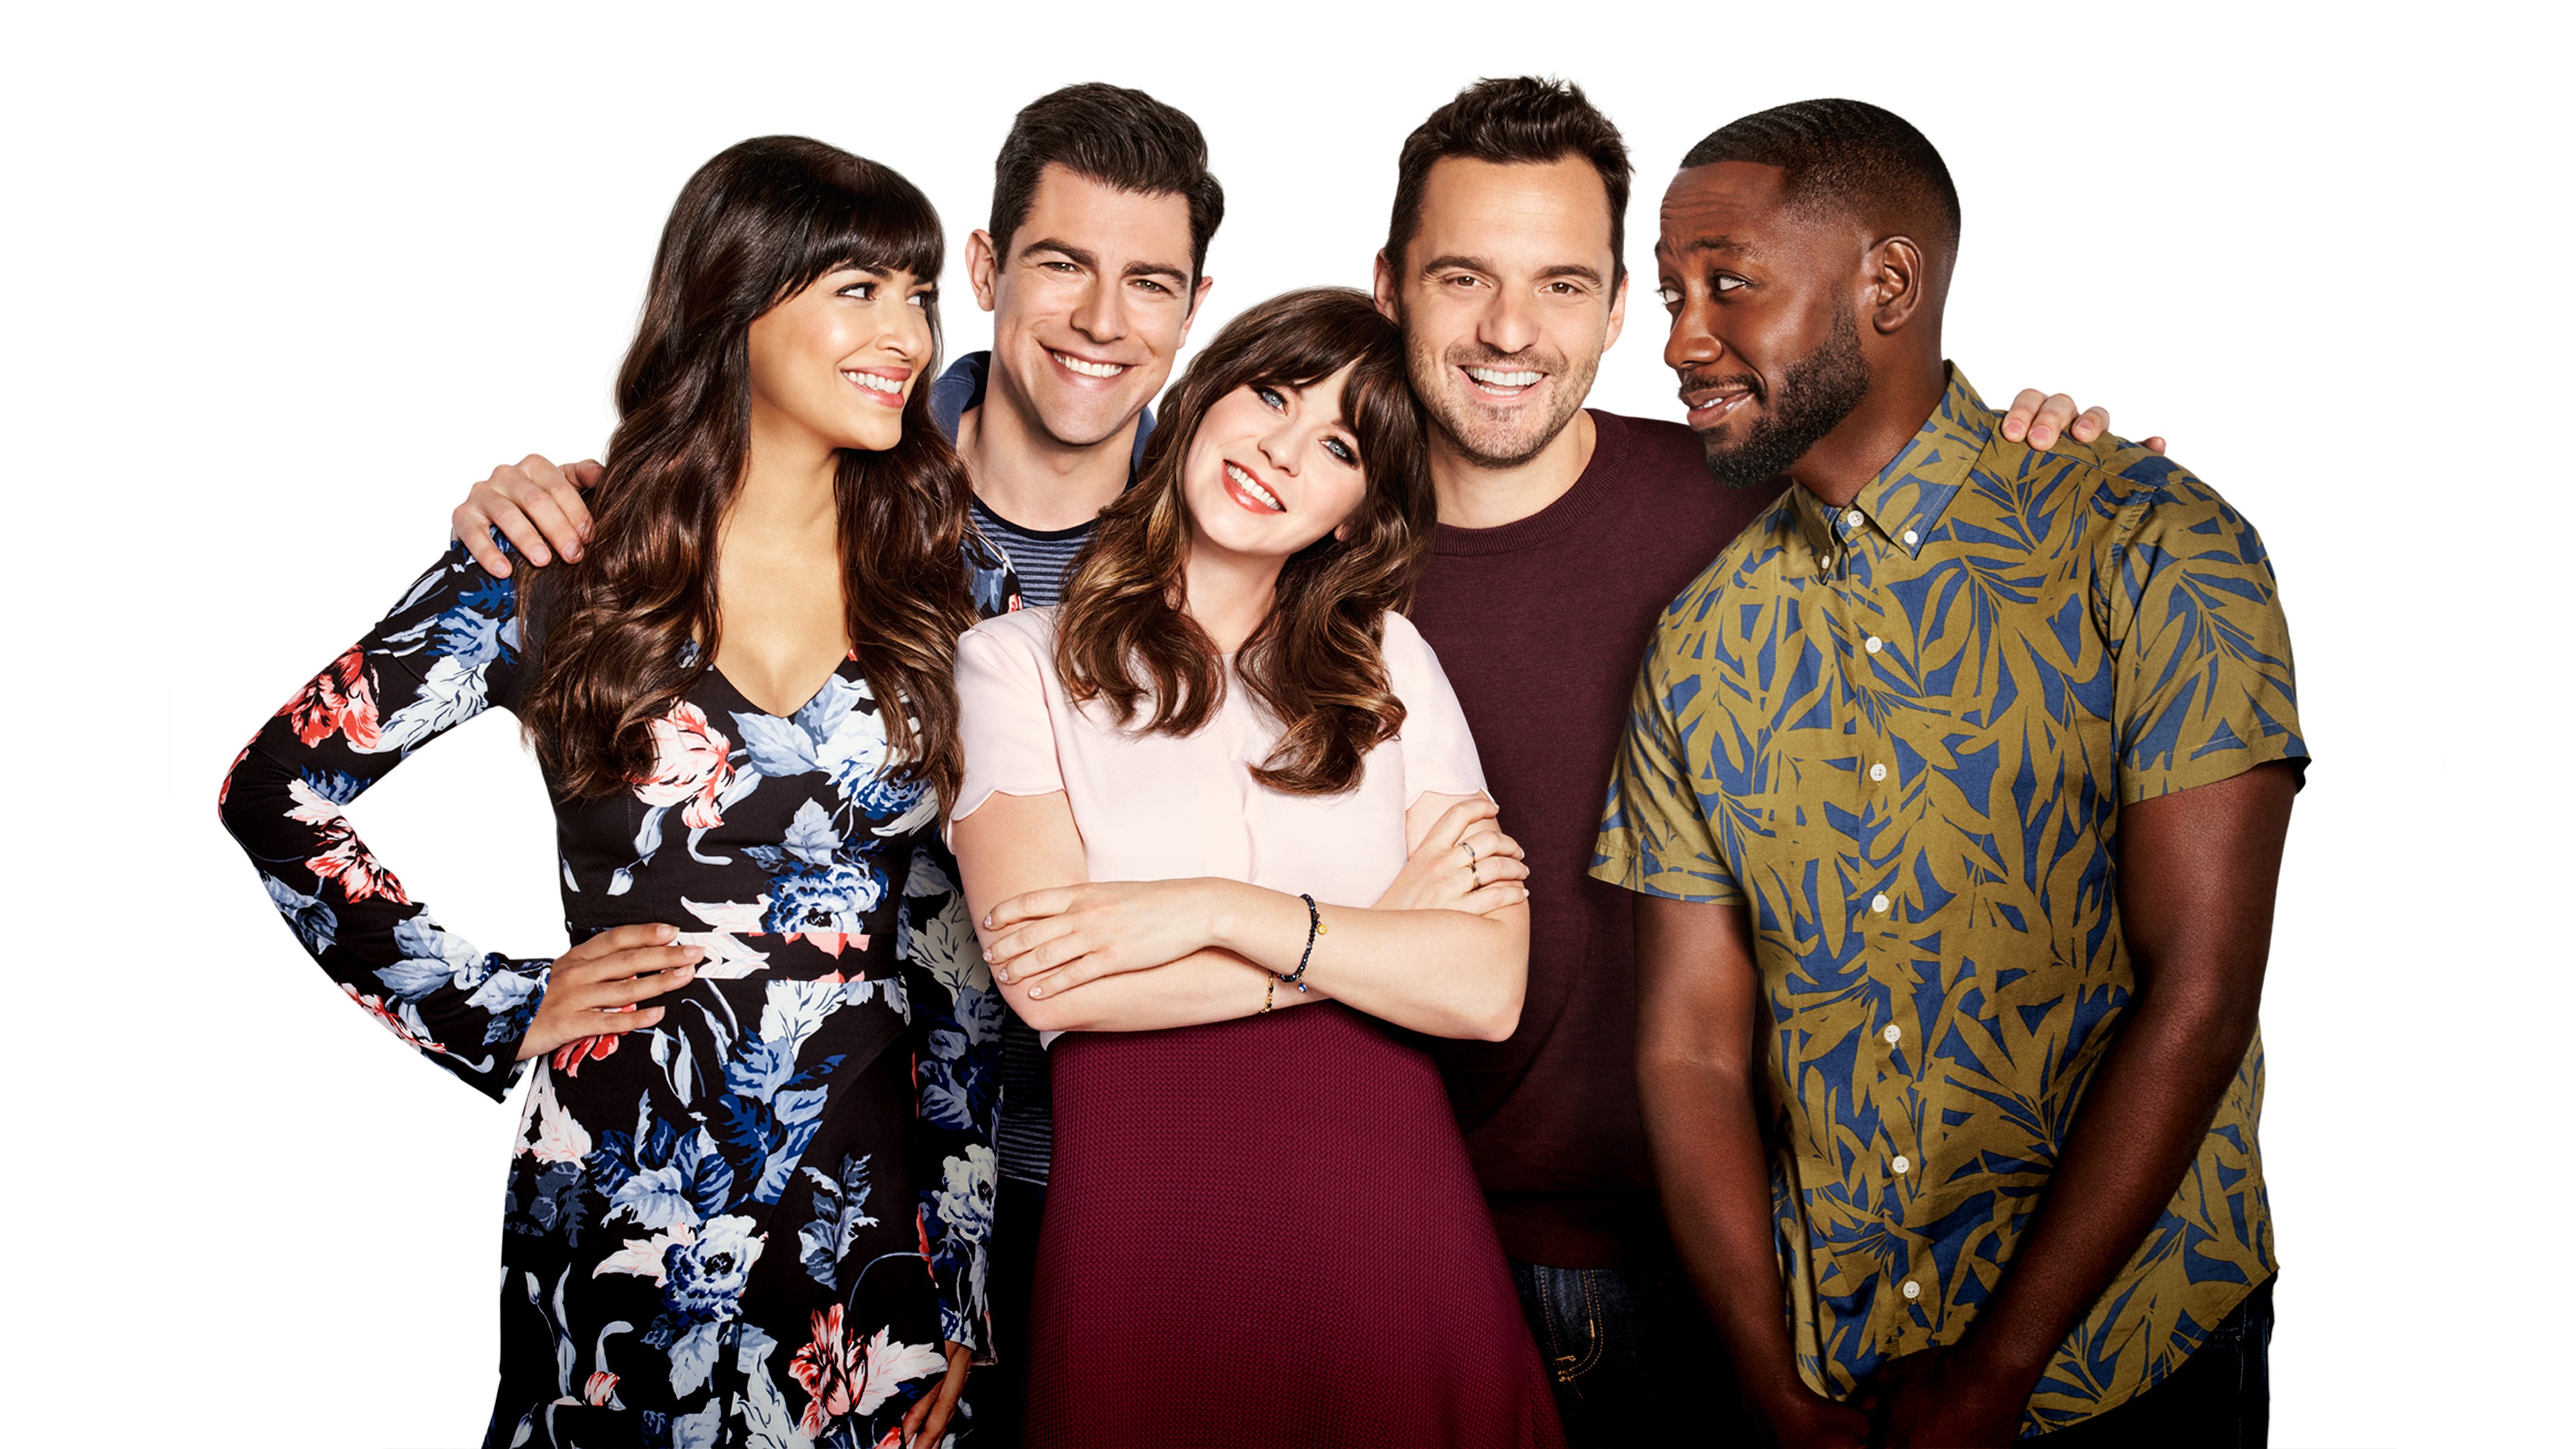 Exclusive: All 7 Seasons of ‘New Girl’ is Coming to Disney+ UK/IRE